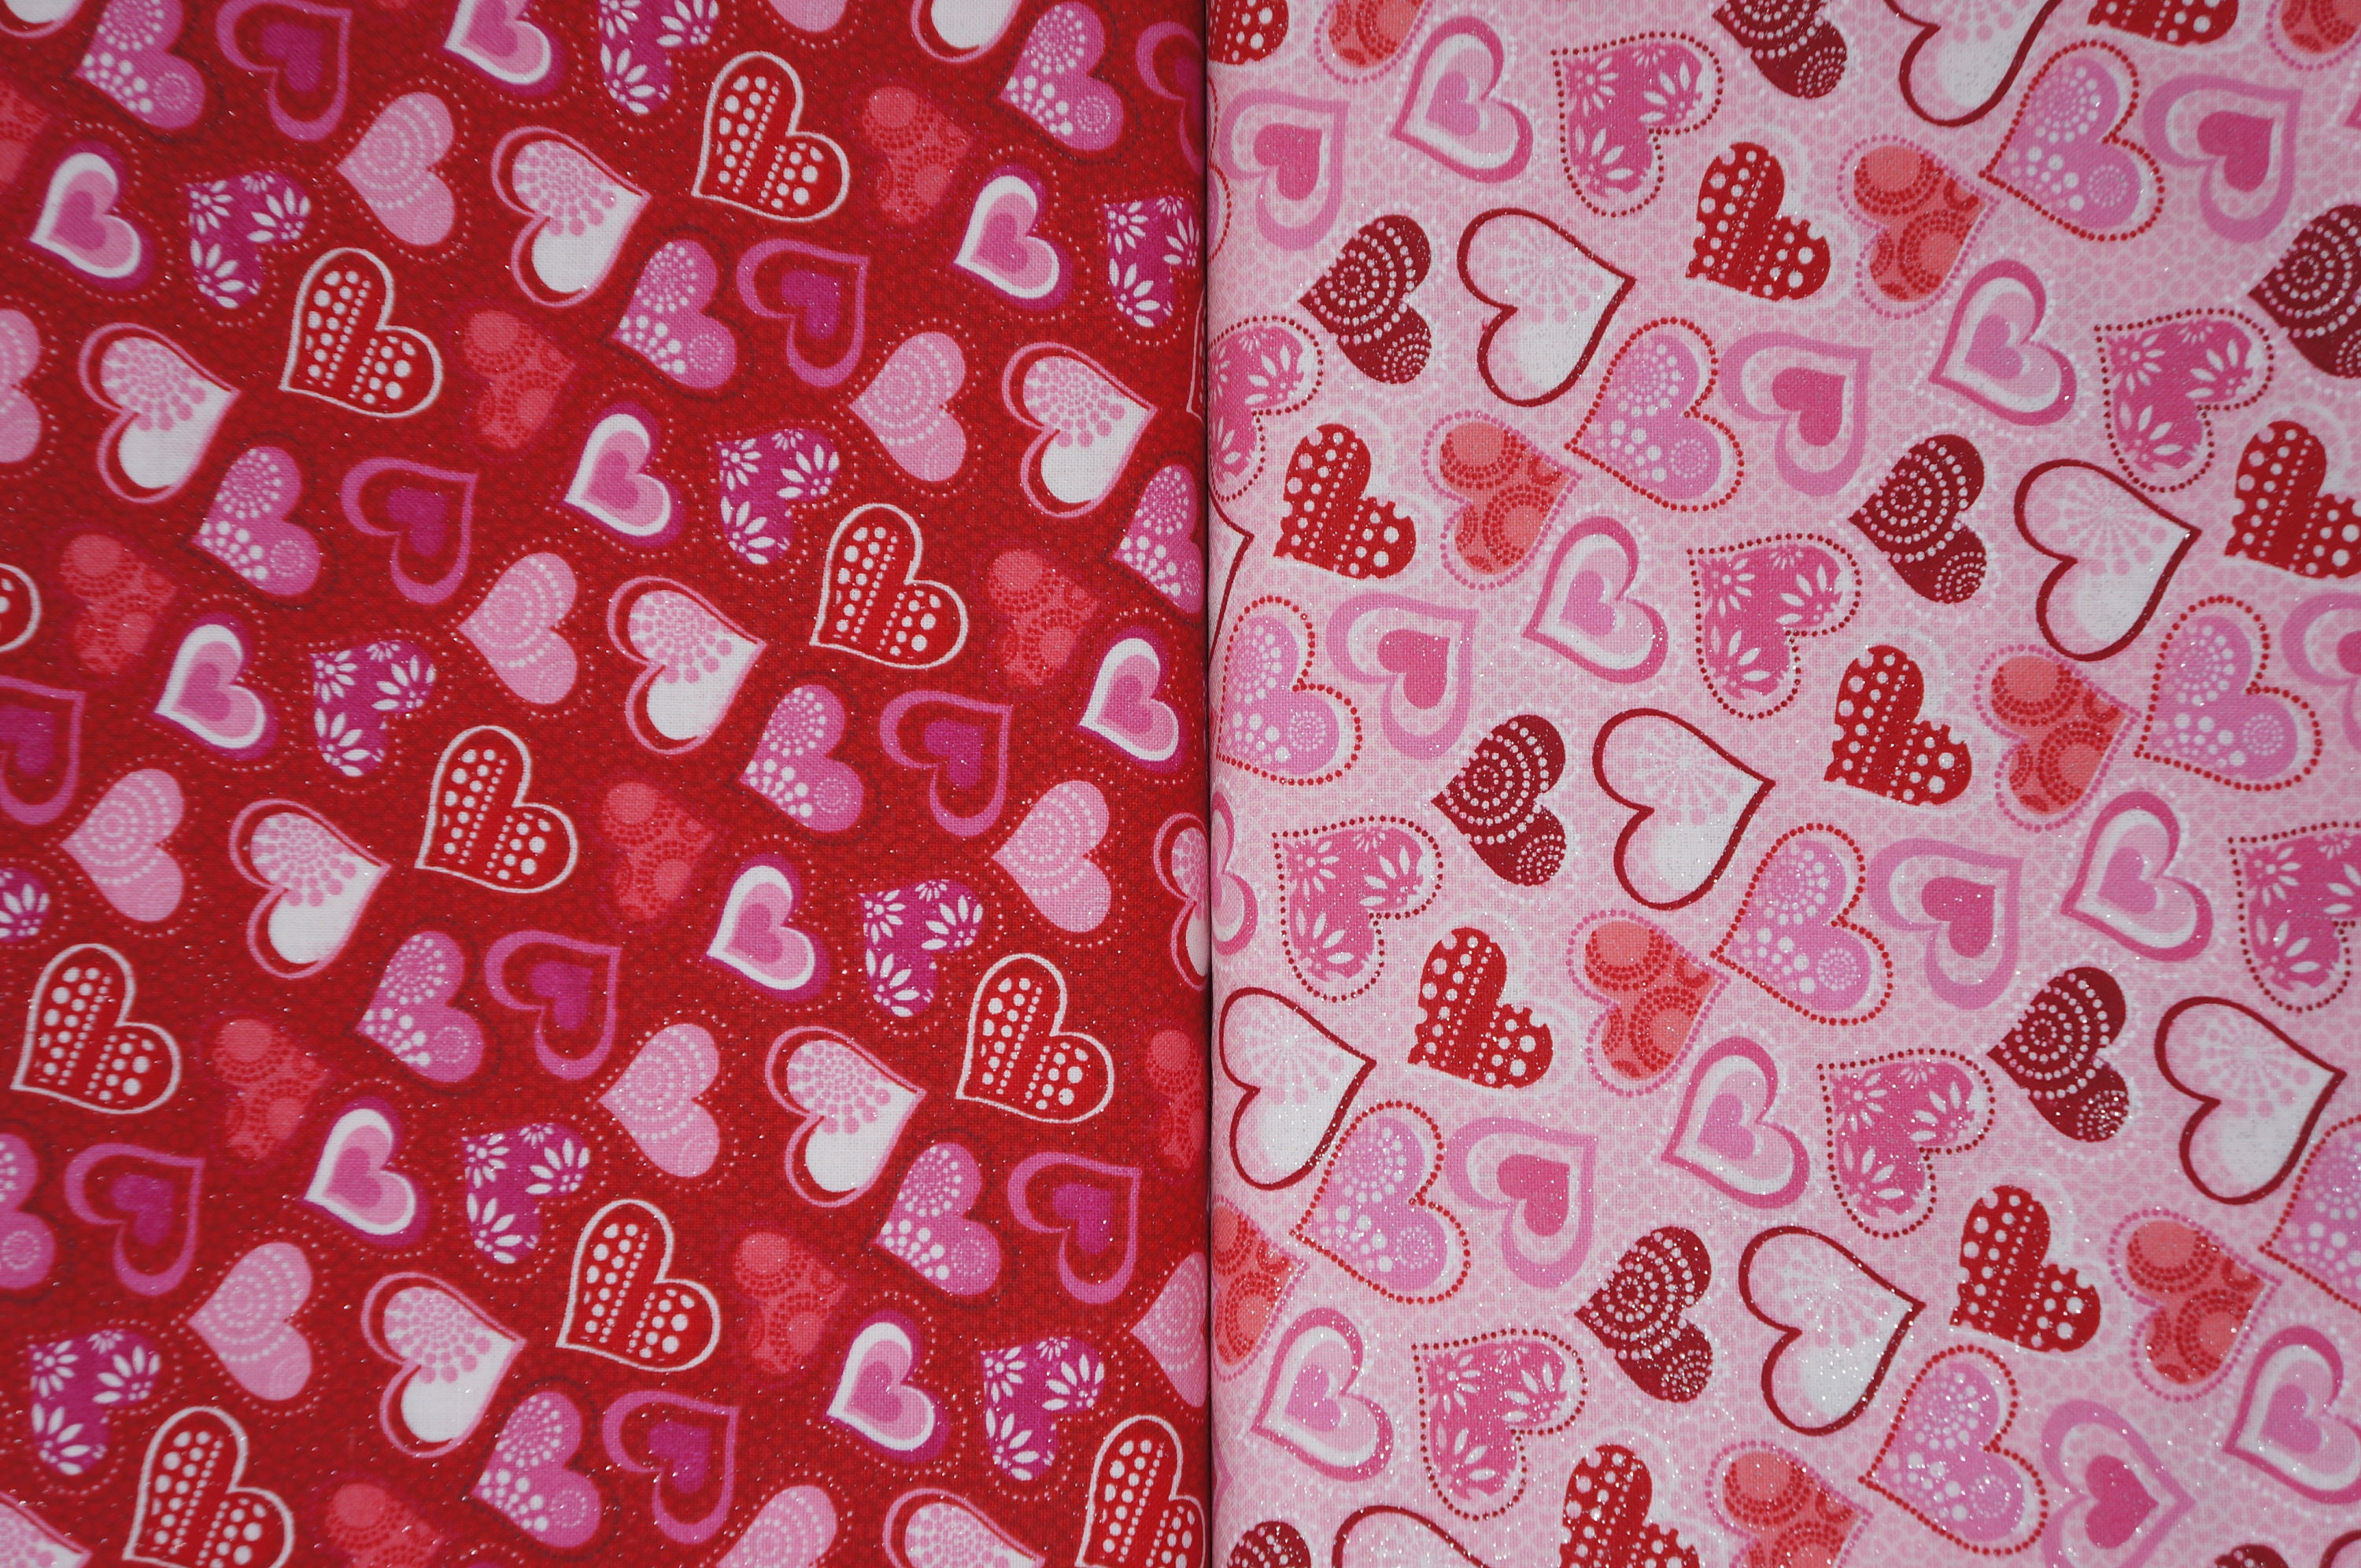 Patterned Hearts on Pink and Red Glitter Valentine's Day Novelty Cotton  Fabric